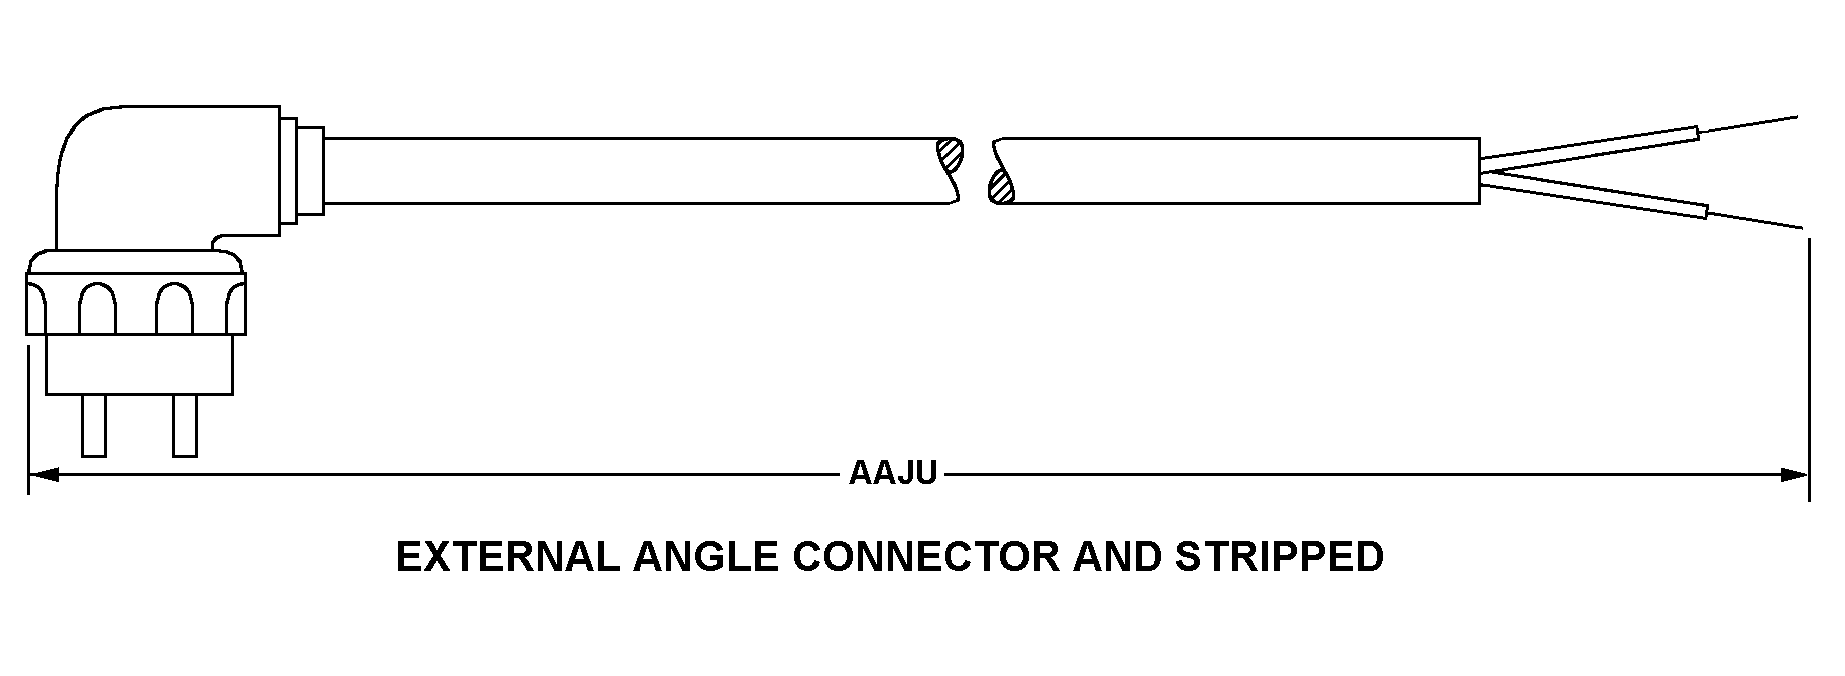 EXTERNAL ANGLE CONNECTOR AND STRIPPED style nsn 6150-01-182-9680